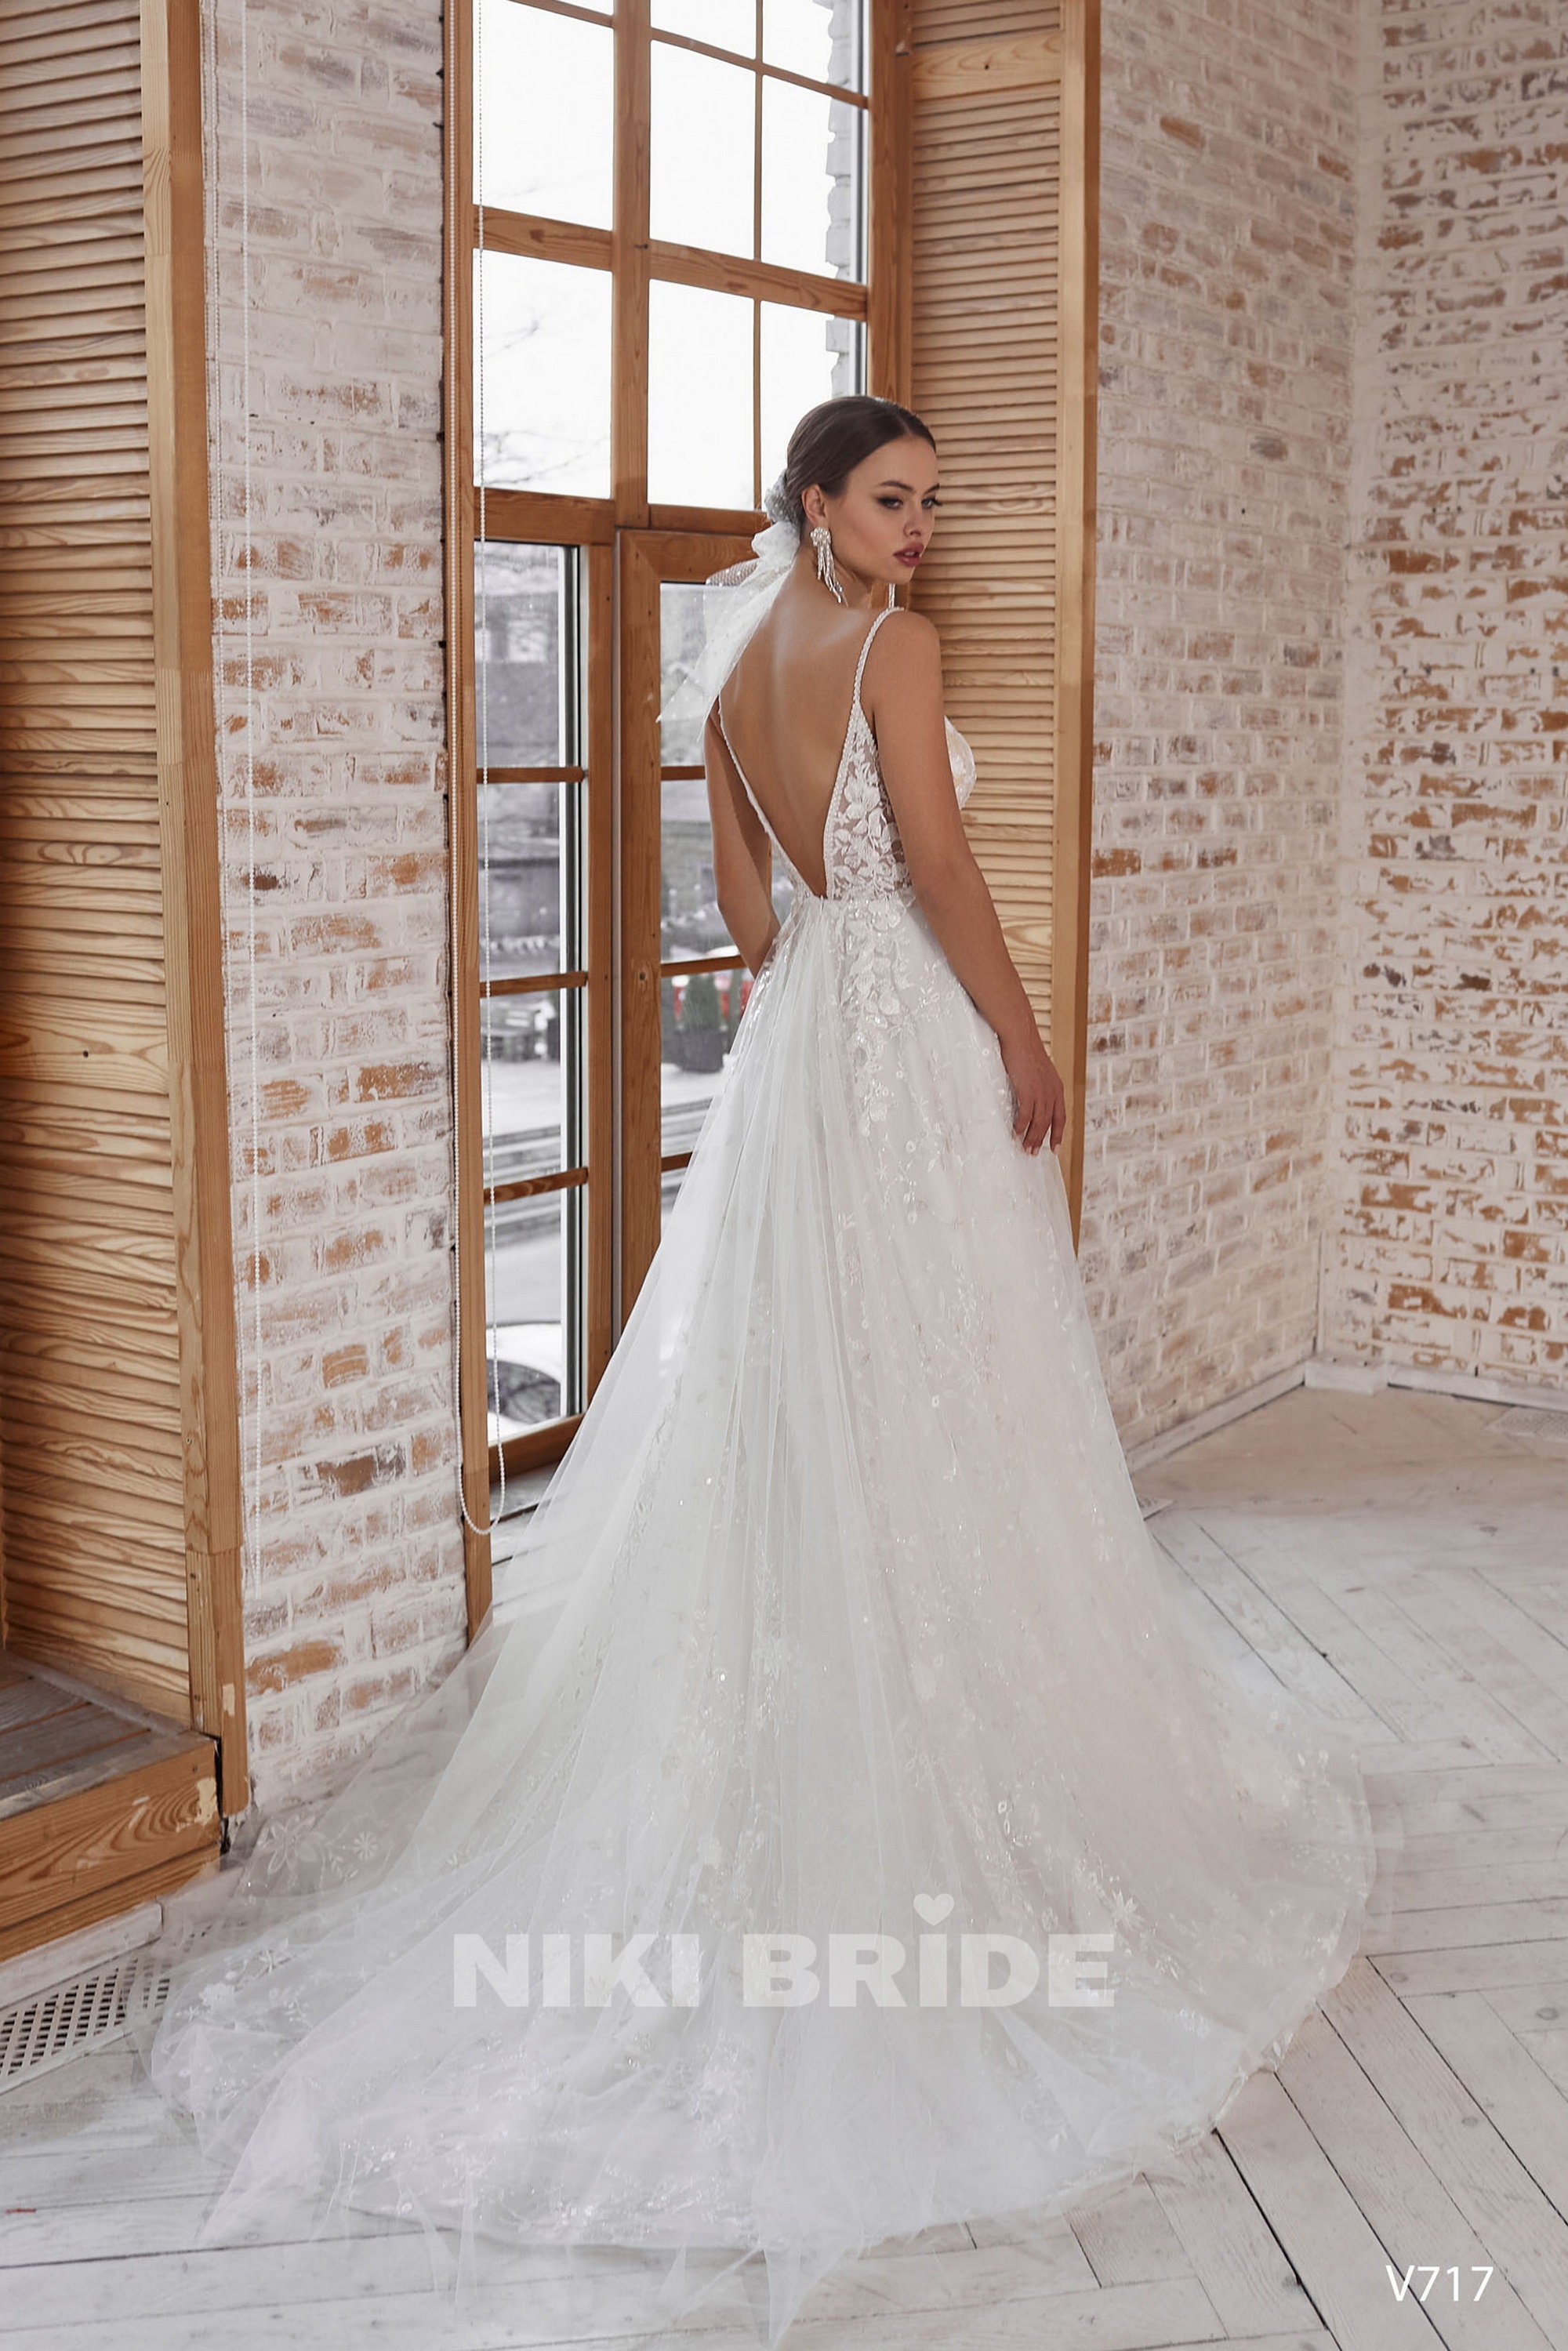 Delicate Wedding Dress Made of Tulle and Lace, Dress With Straps